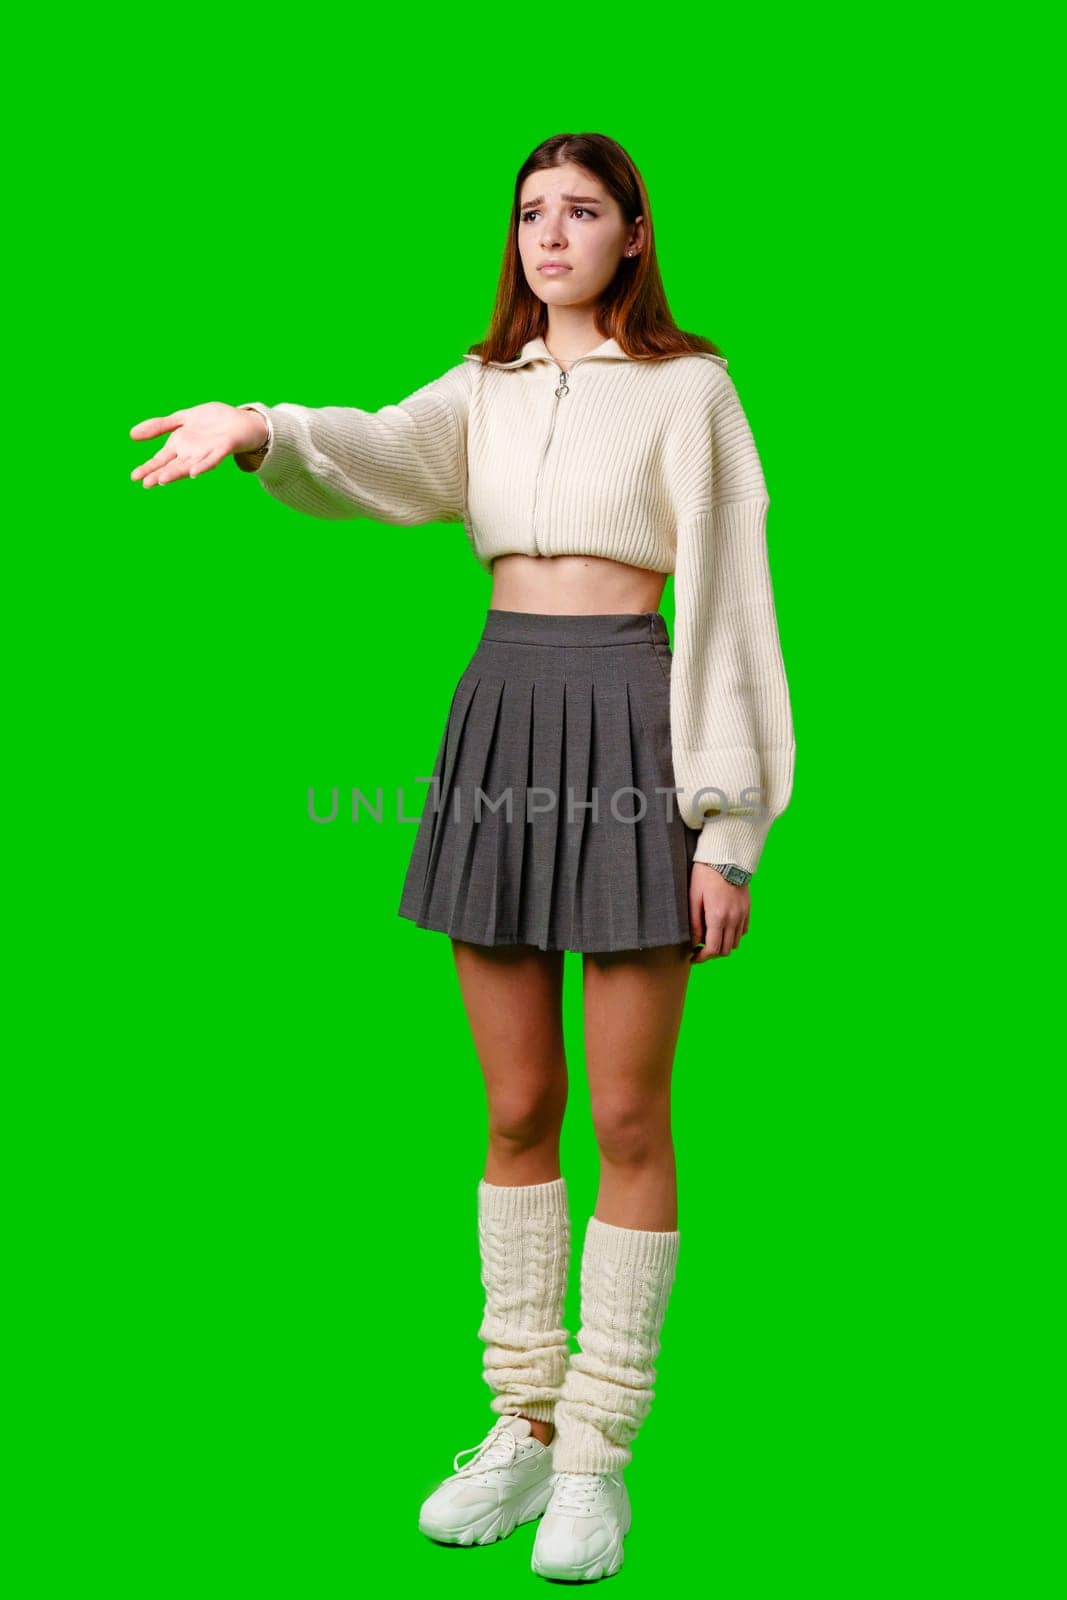 A woman dressed in a skirt and sweater is pointing at an unseen object or direction, gestures with intent and focus on something specific.